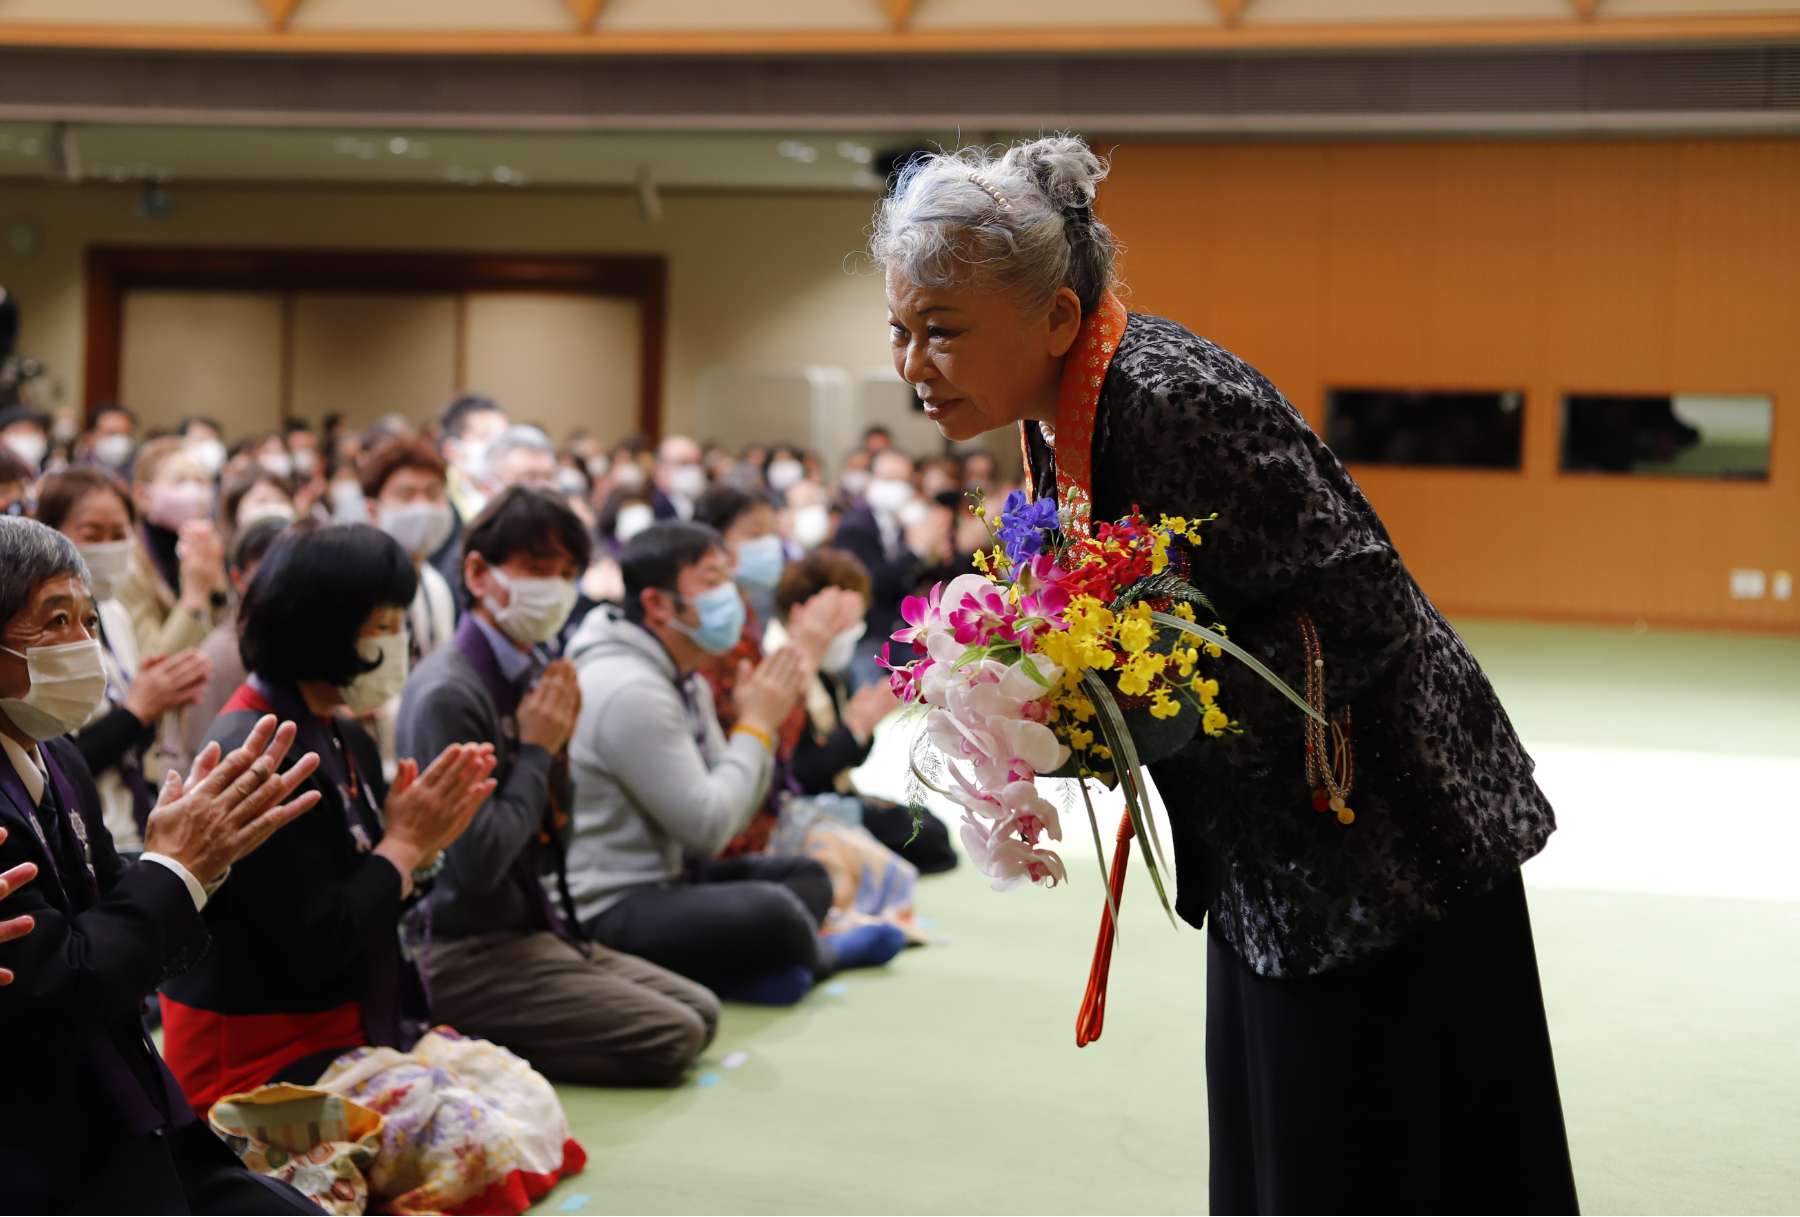 Her Holiness, in a patterned jacket and dress with bright orange kesa, holding a bouquet of flowers, bows slightly to greet seated members of a congregation.